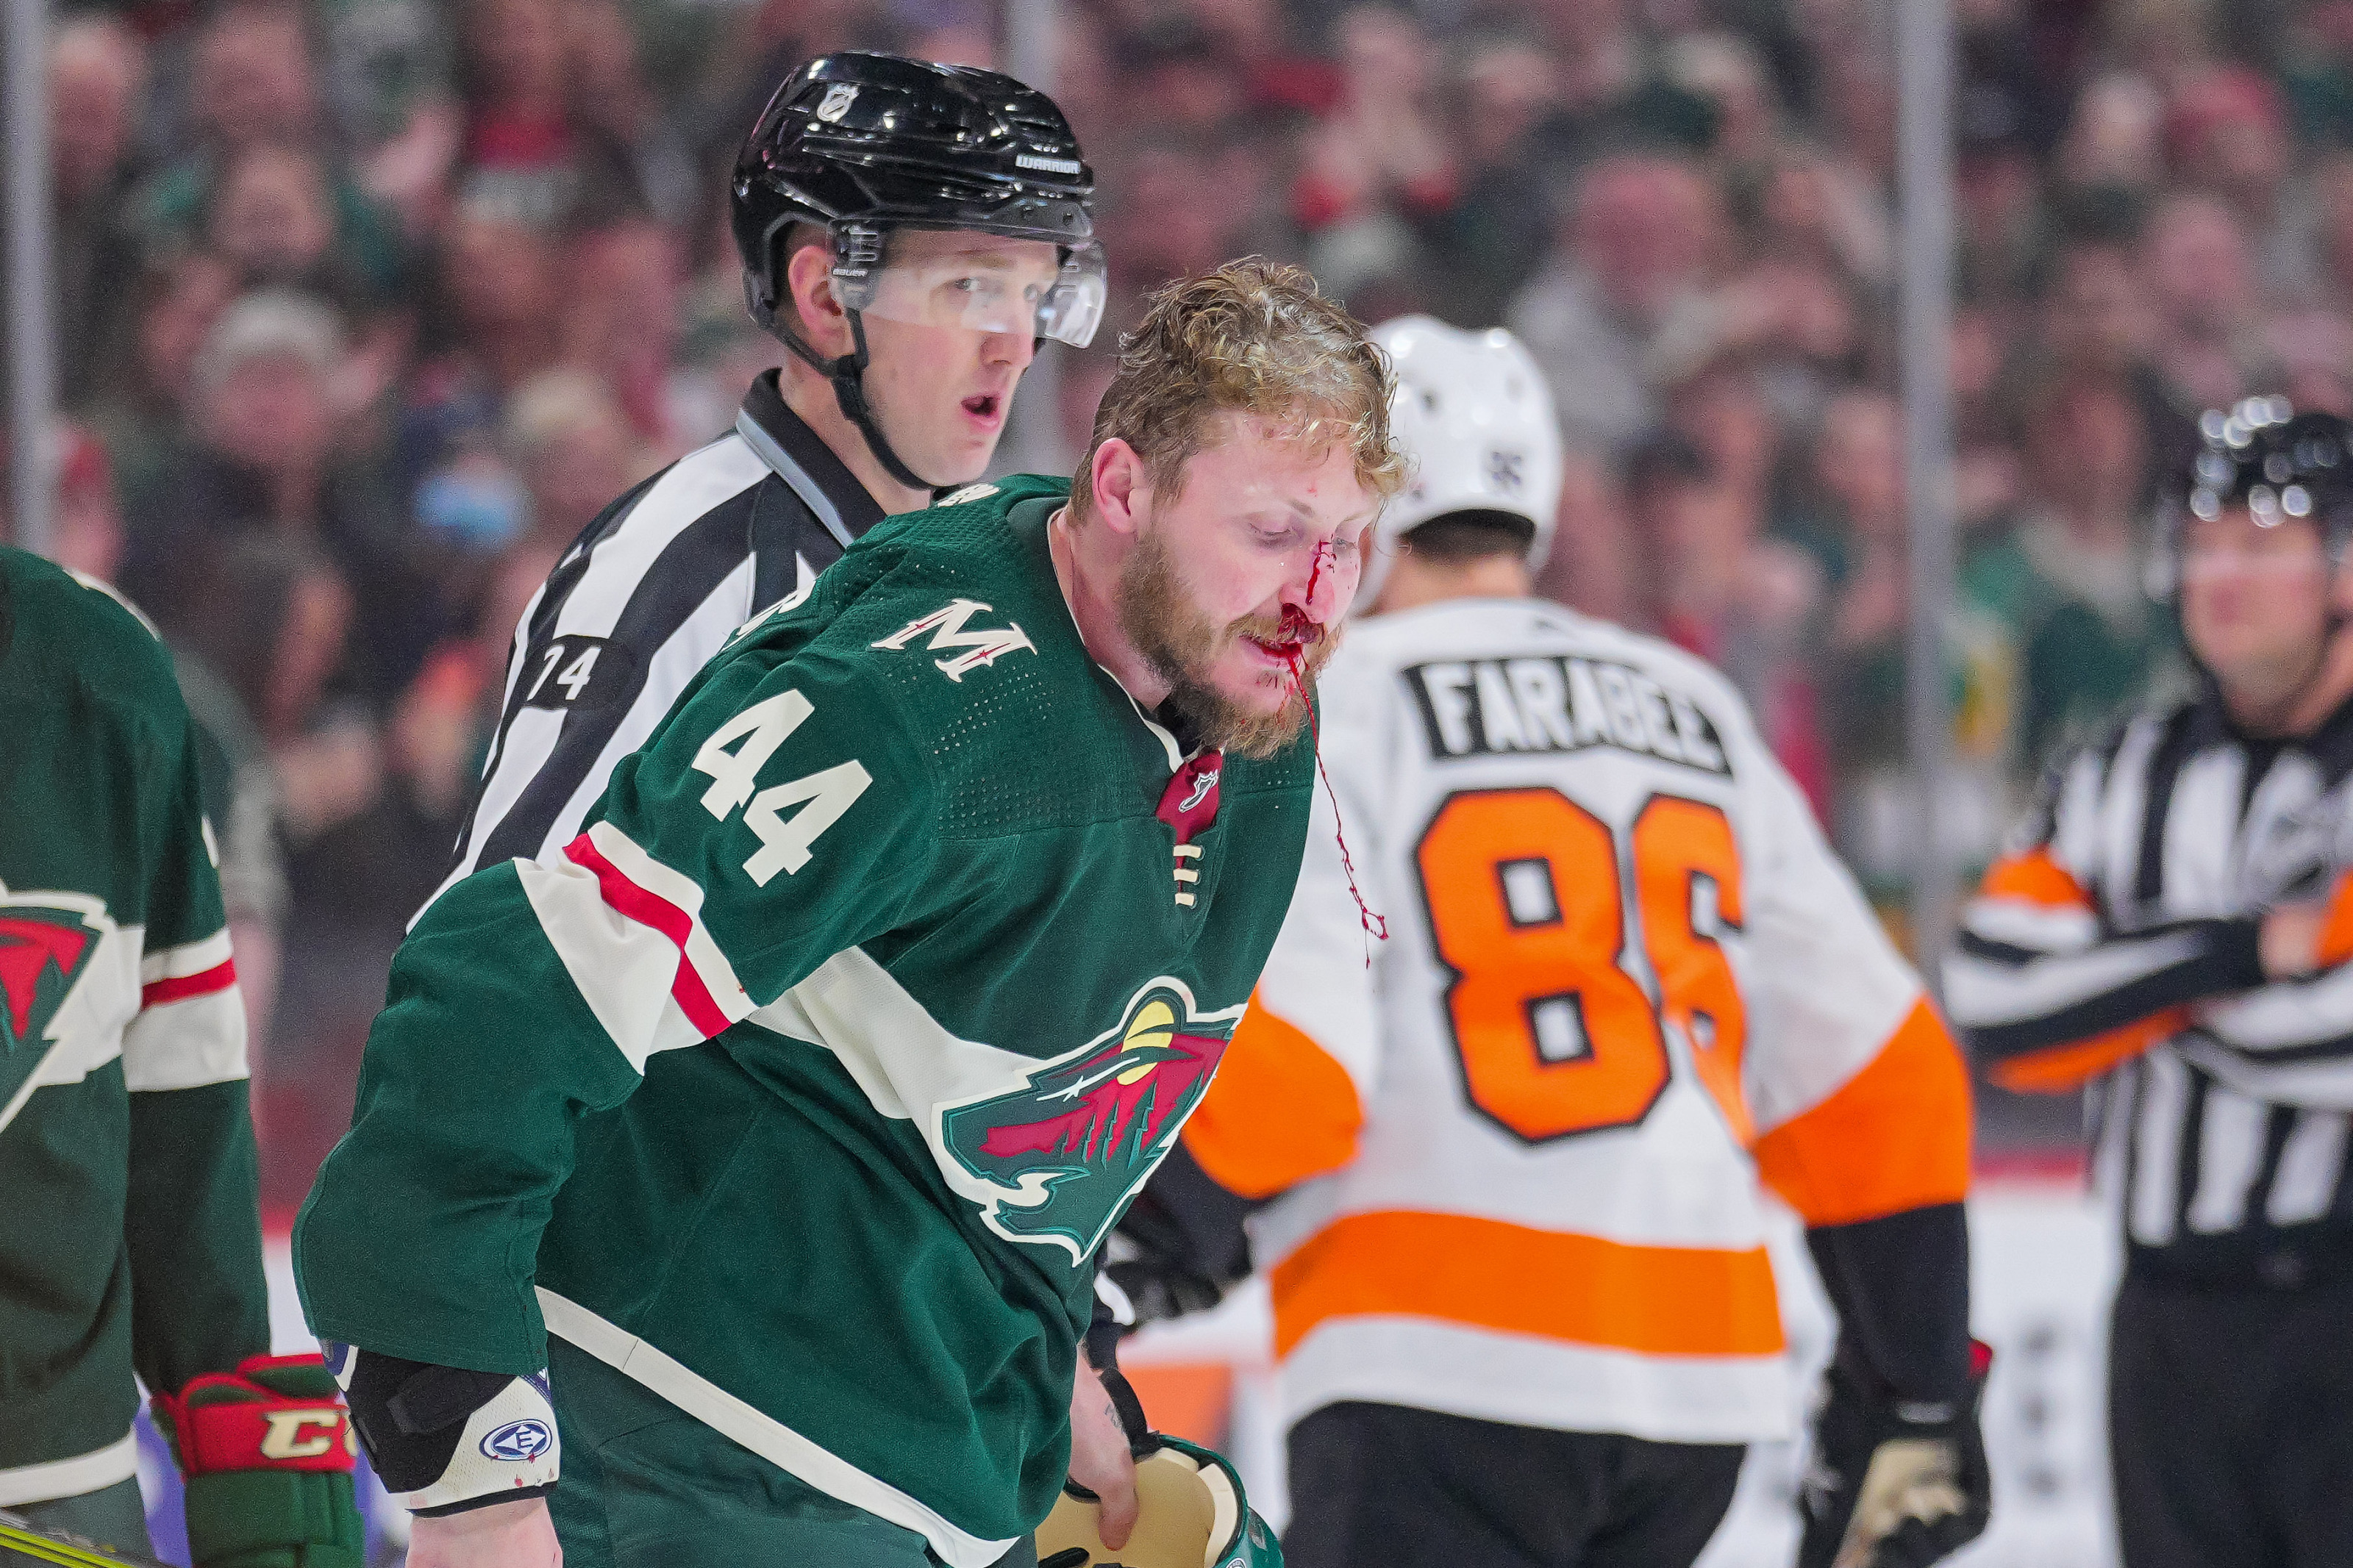 Newest Flyer Nic Deslauriers feels he is a perfect fit for Philadelphia